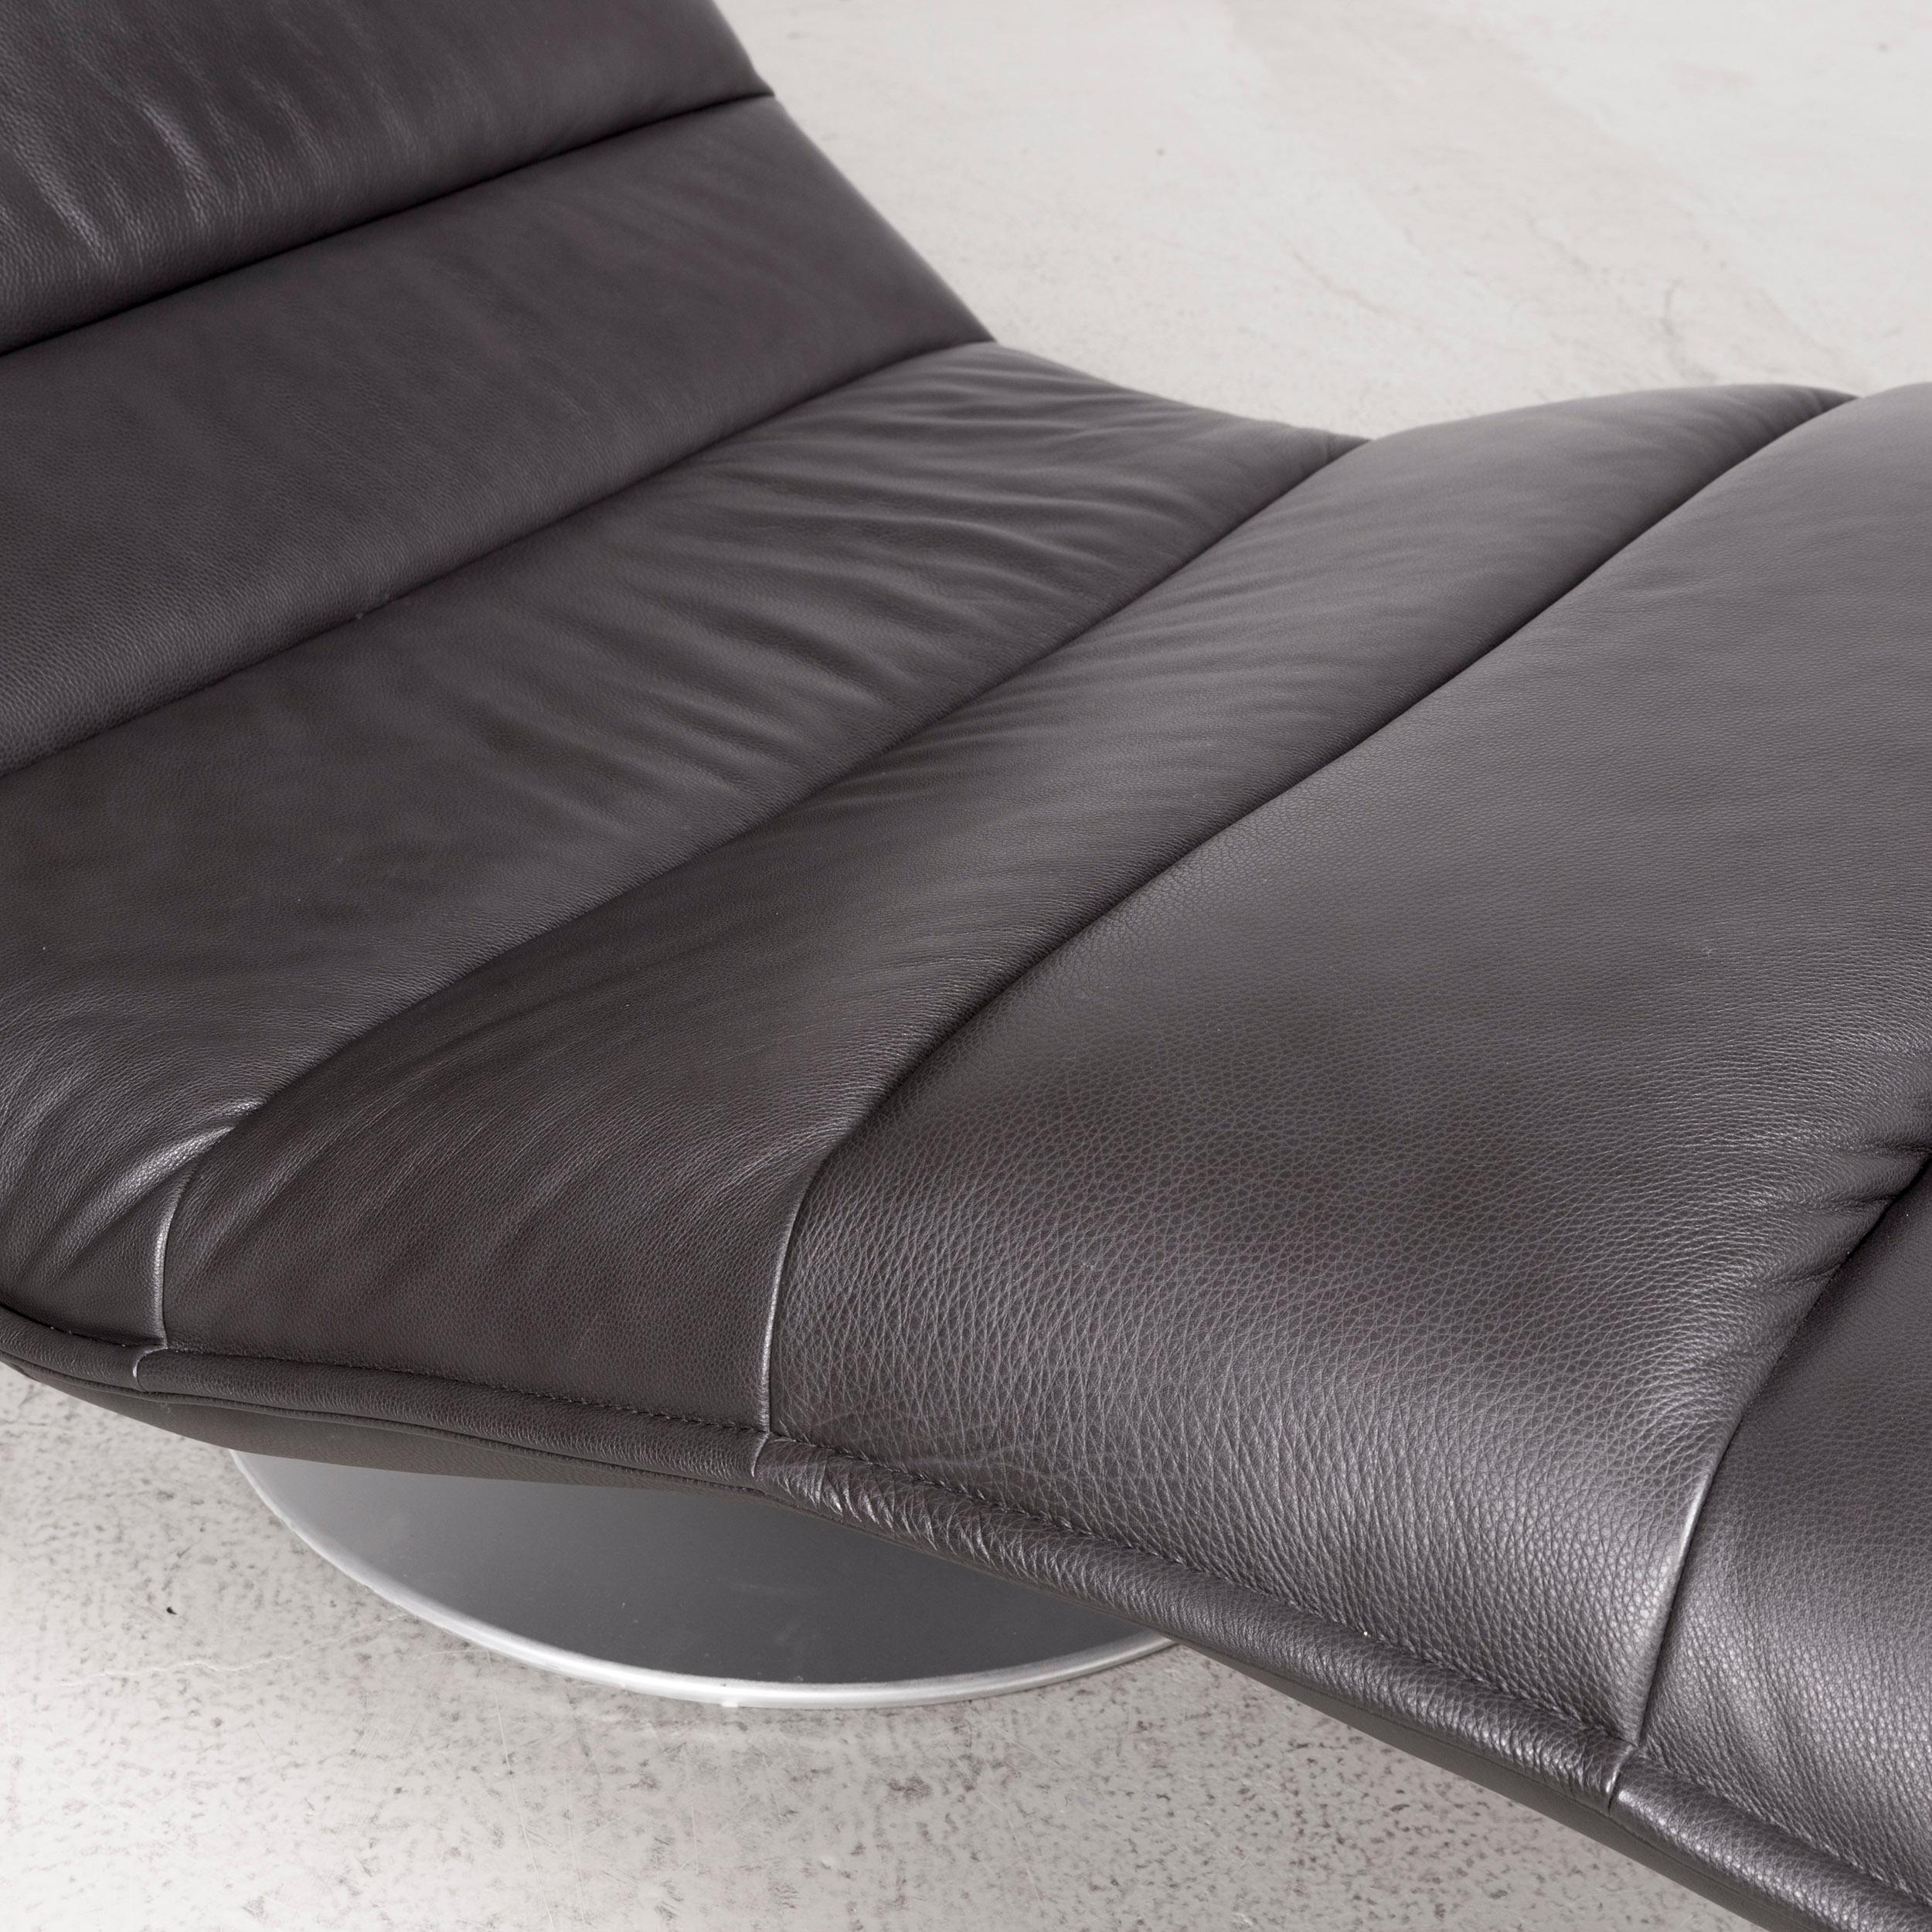 Willi Schillig Inkoognito Leather Lounger Anthracite Genuine Leather For Sale 1